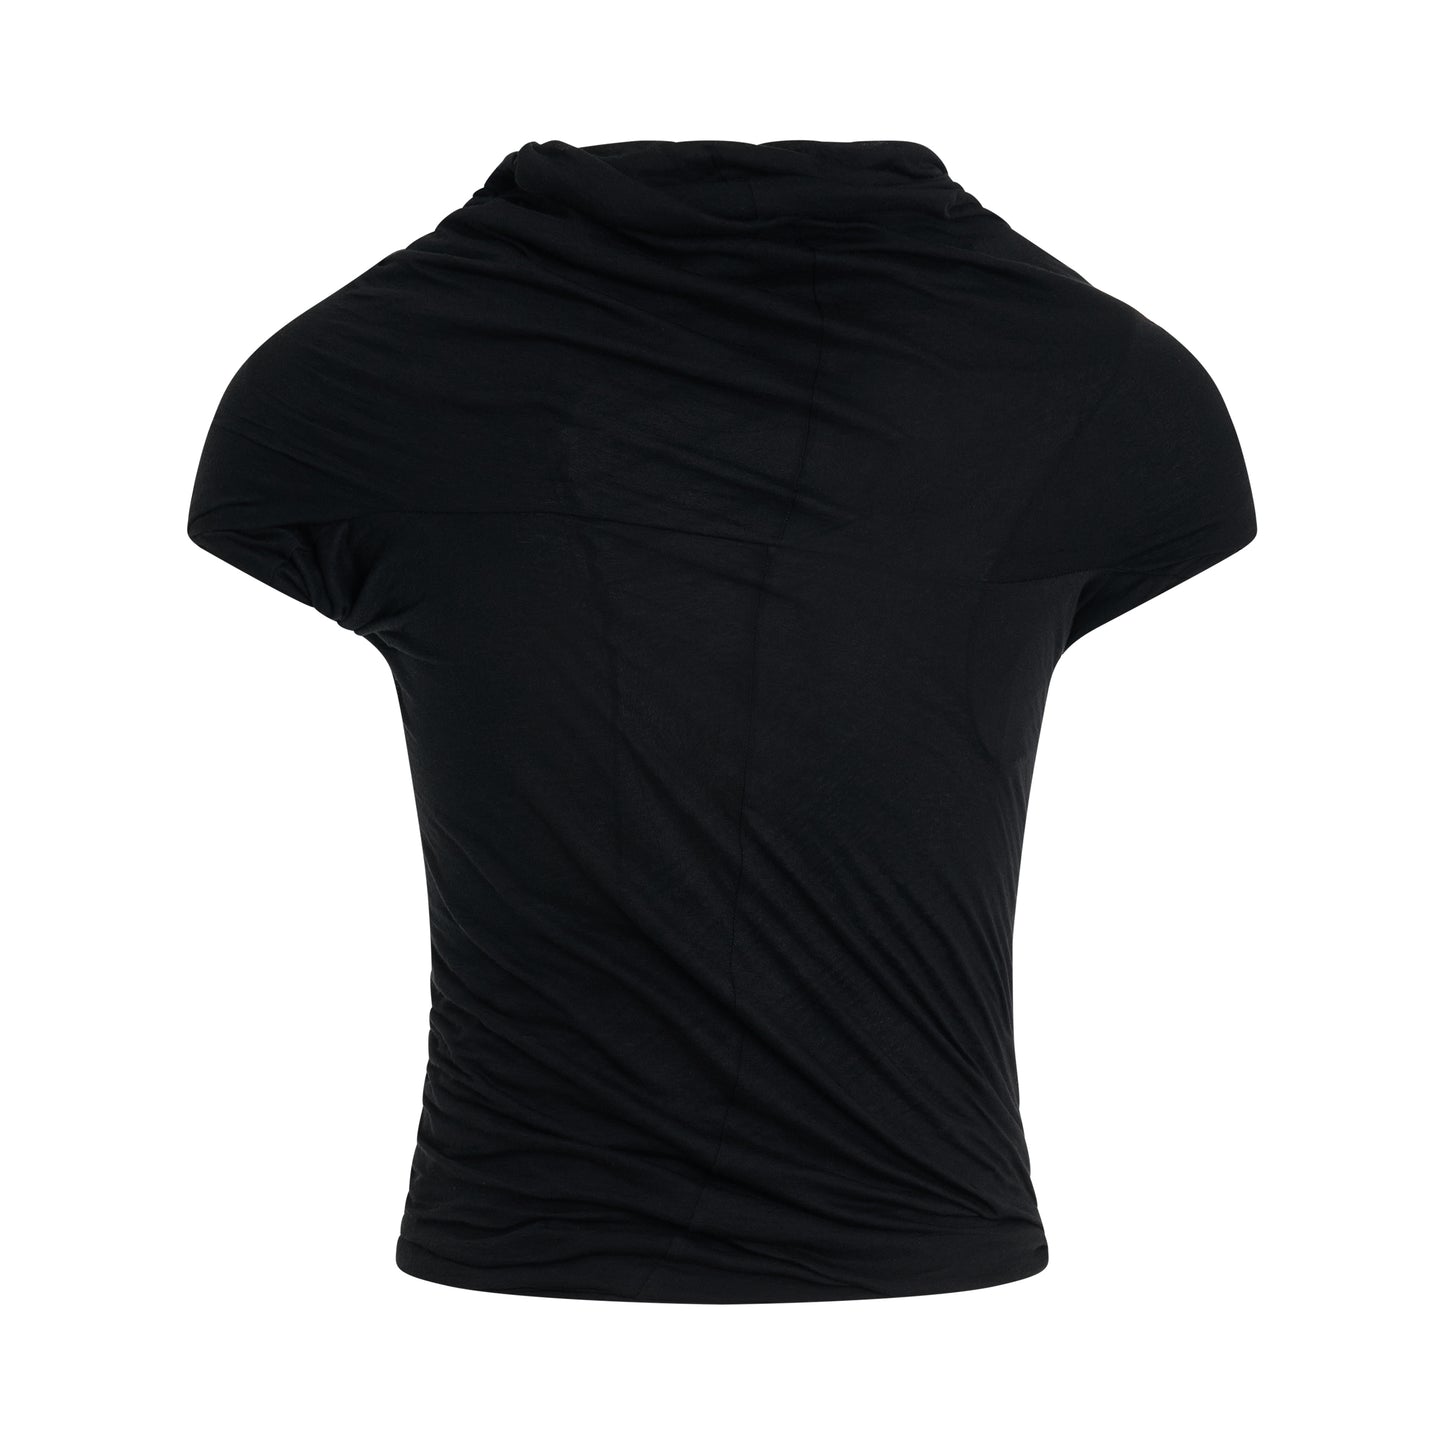 Banded T-Shirt II in Black